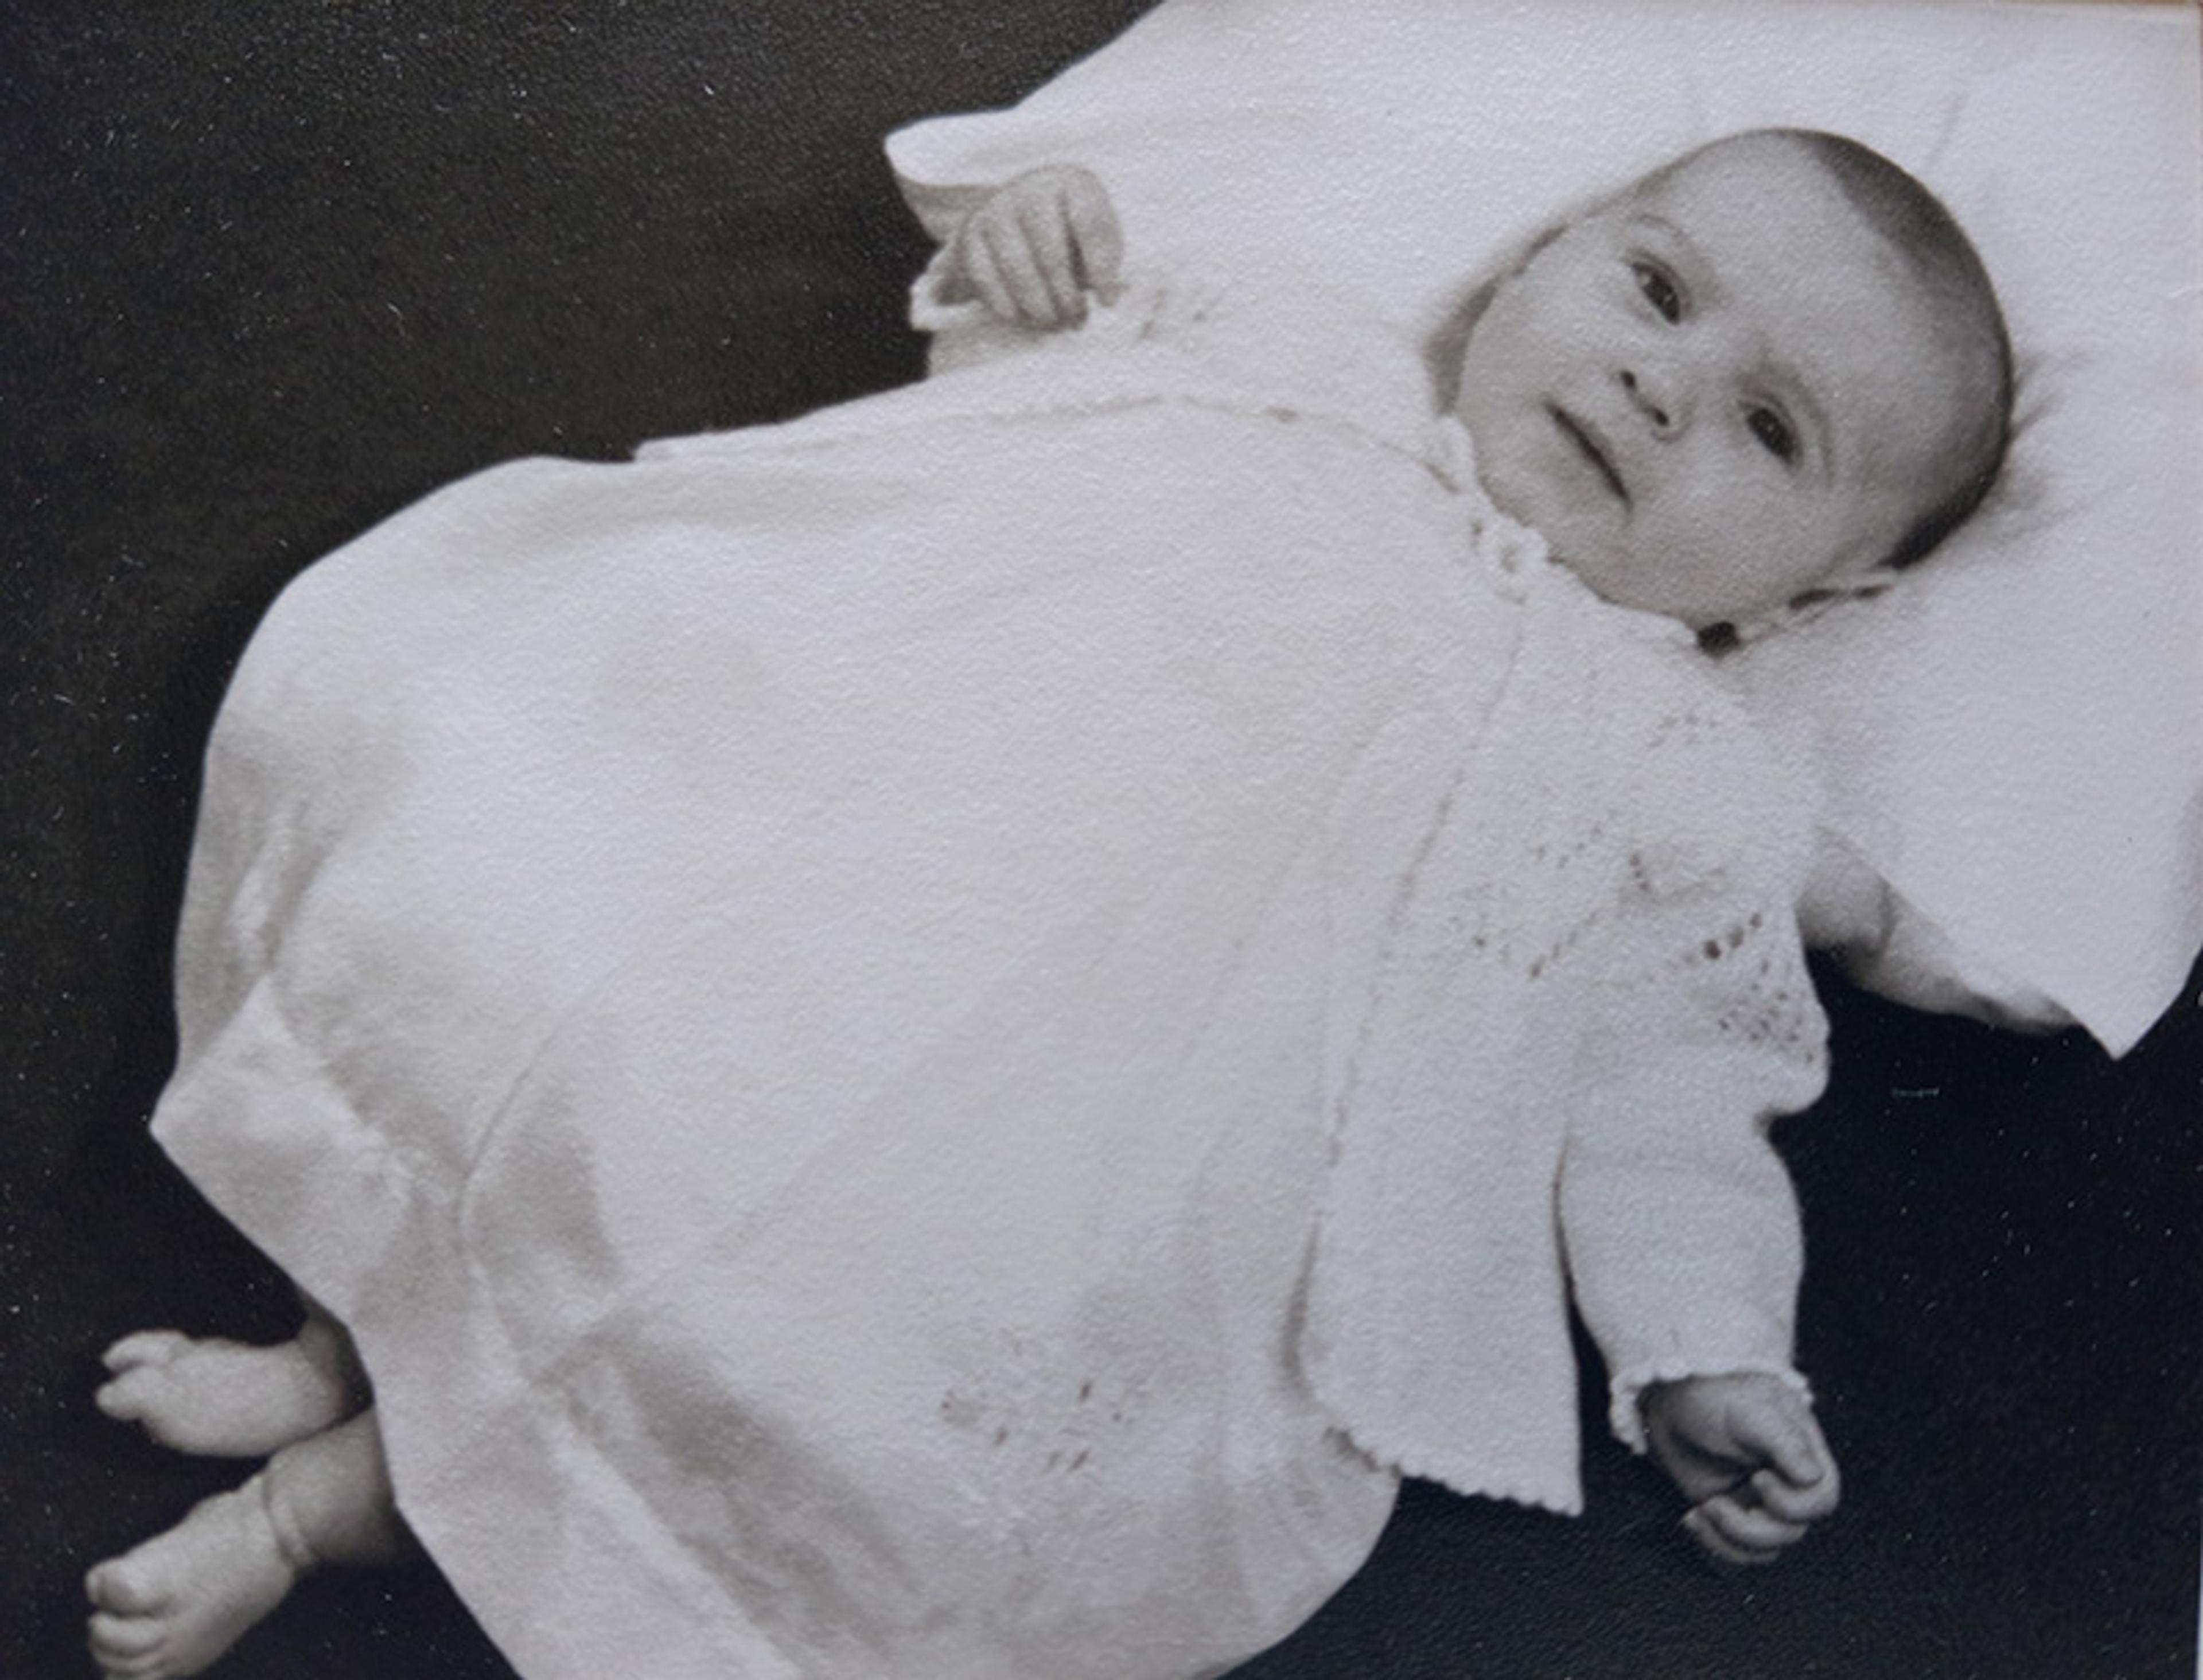 Black-and-white photo of a baby lying on a cushion, wearing a white christening gown and smiling slightly.